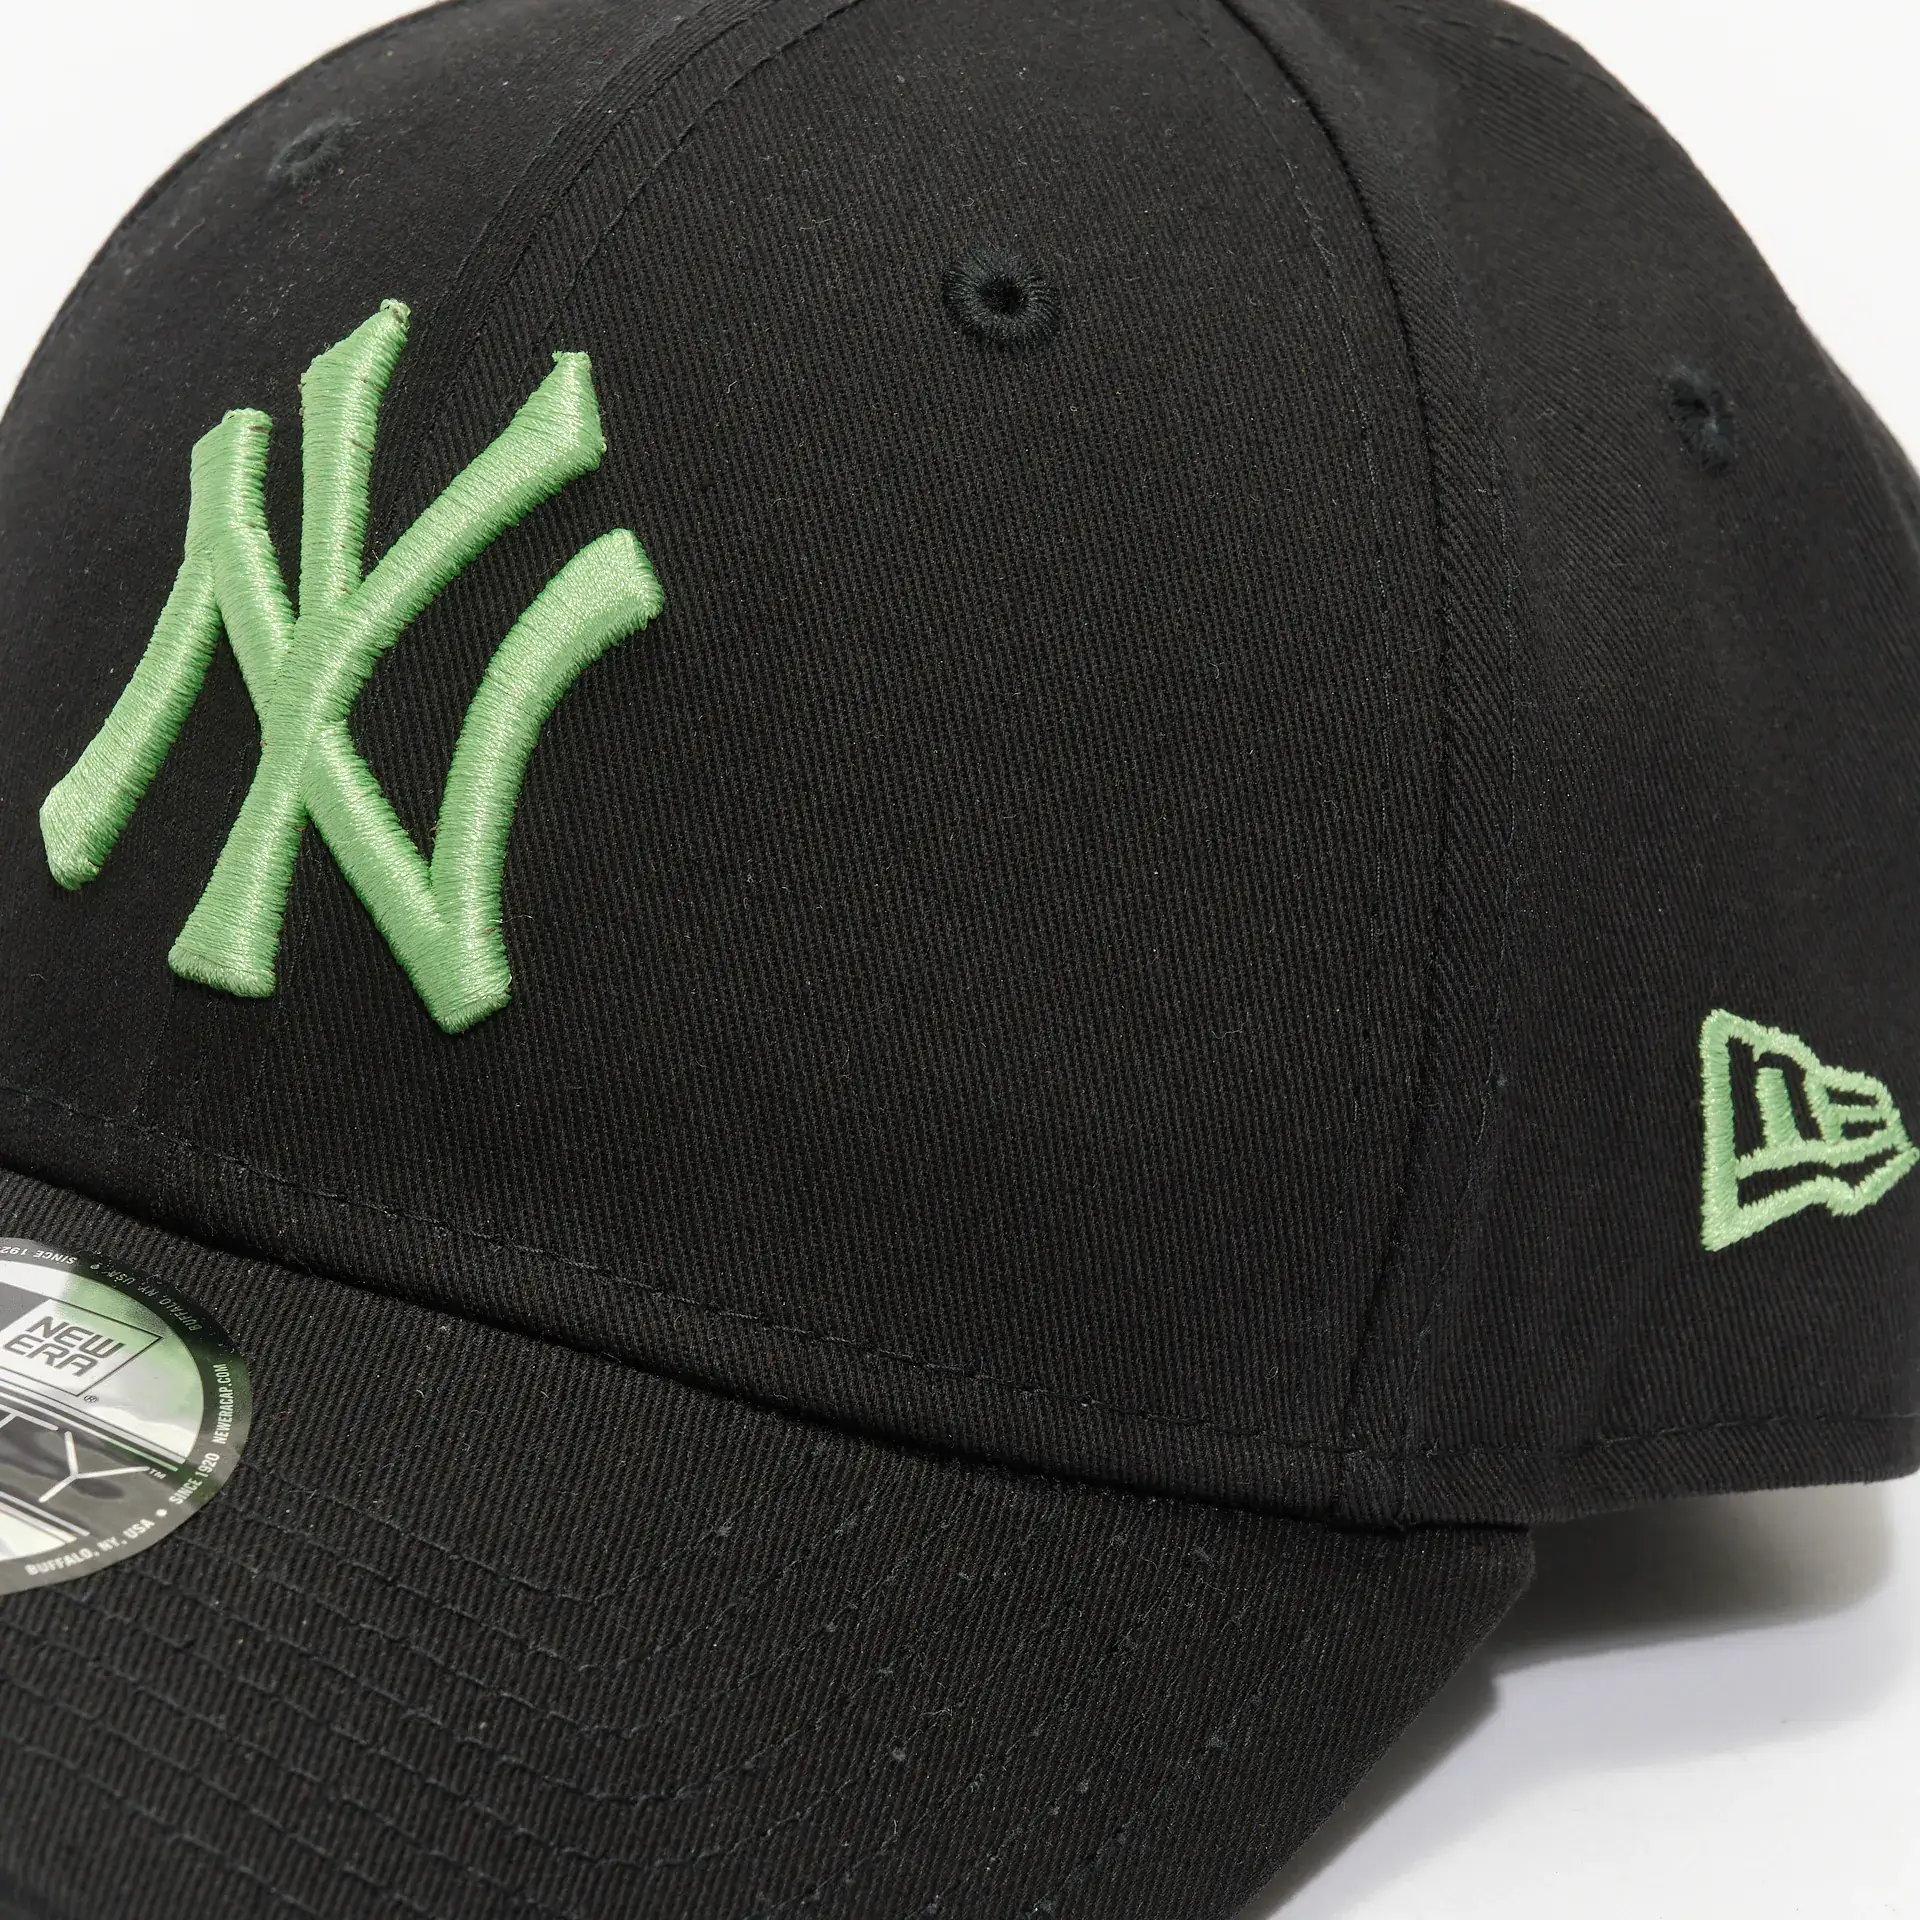 New Era MLB NY Yankees League Essential 9Forty Strapback Cap Black/Green Forrest